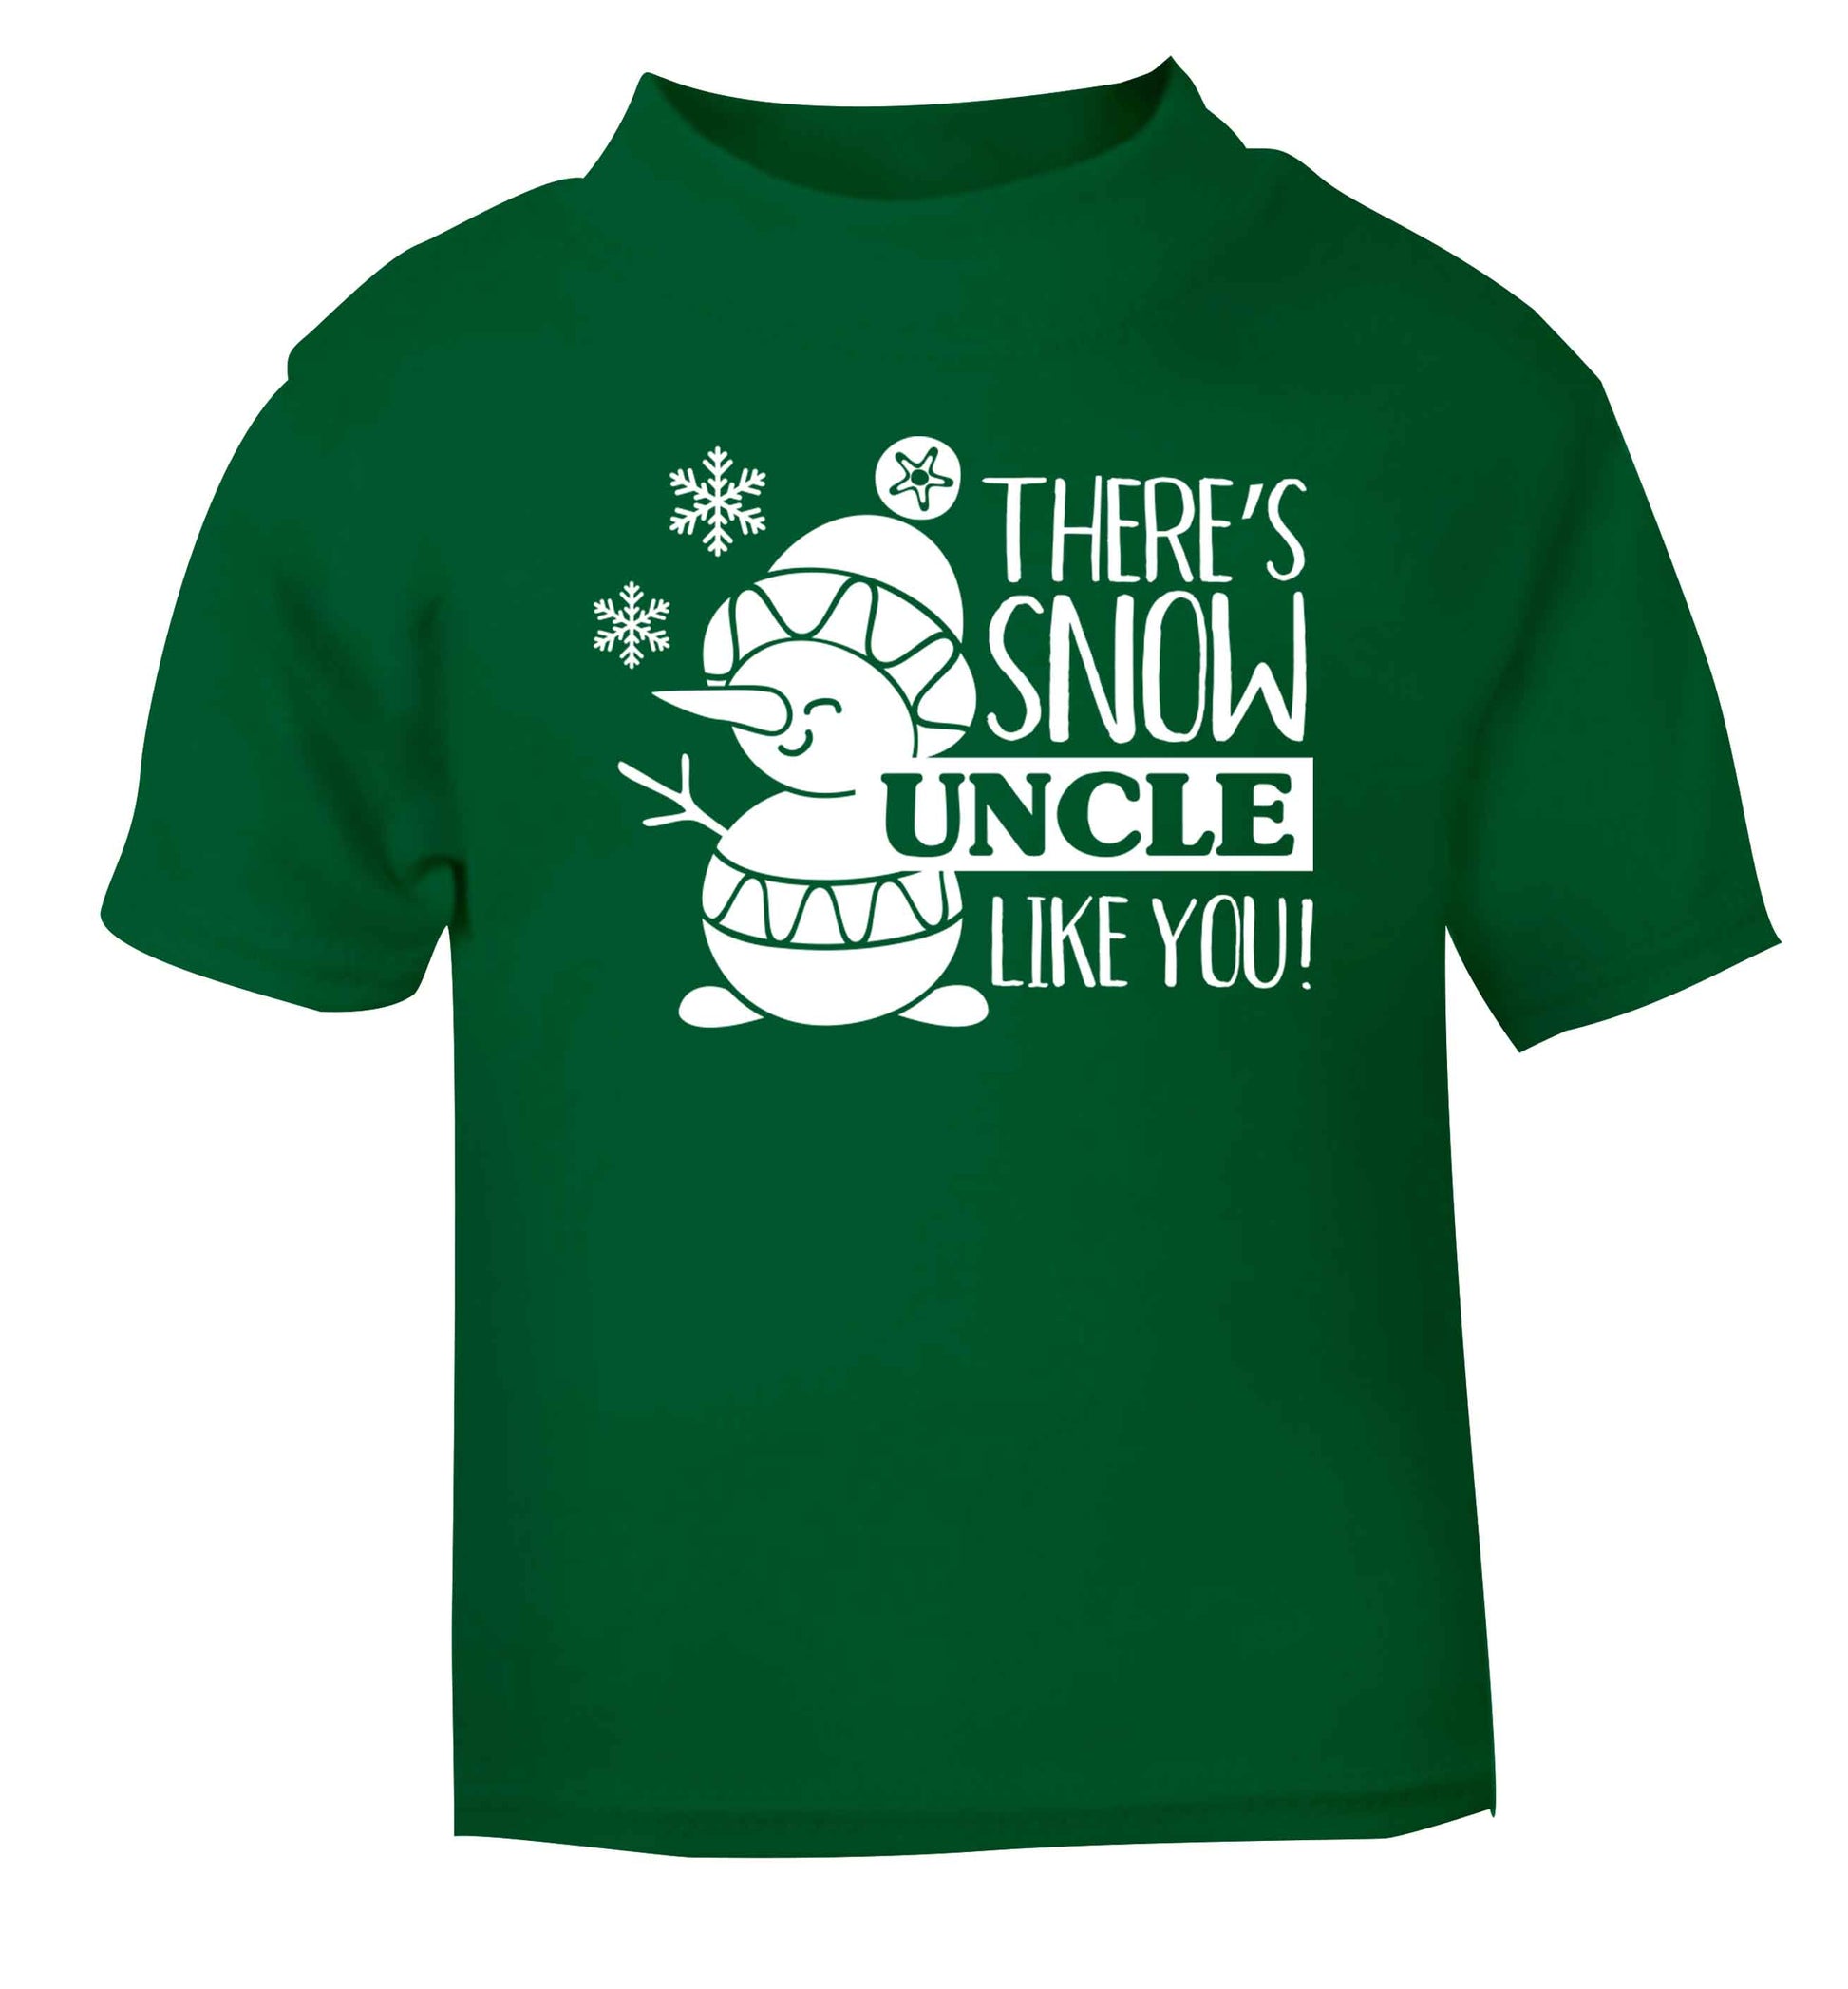 There's snow uncle like you green baby toddler Tshirt 2 Years